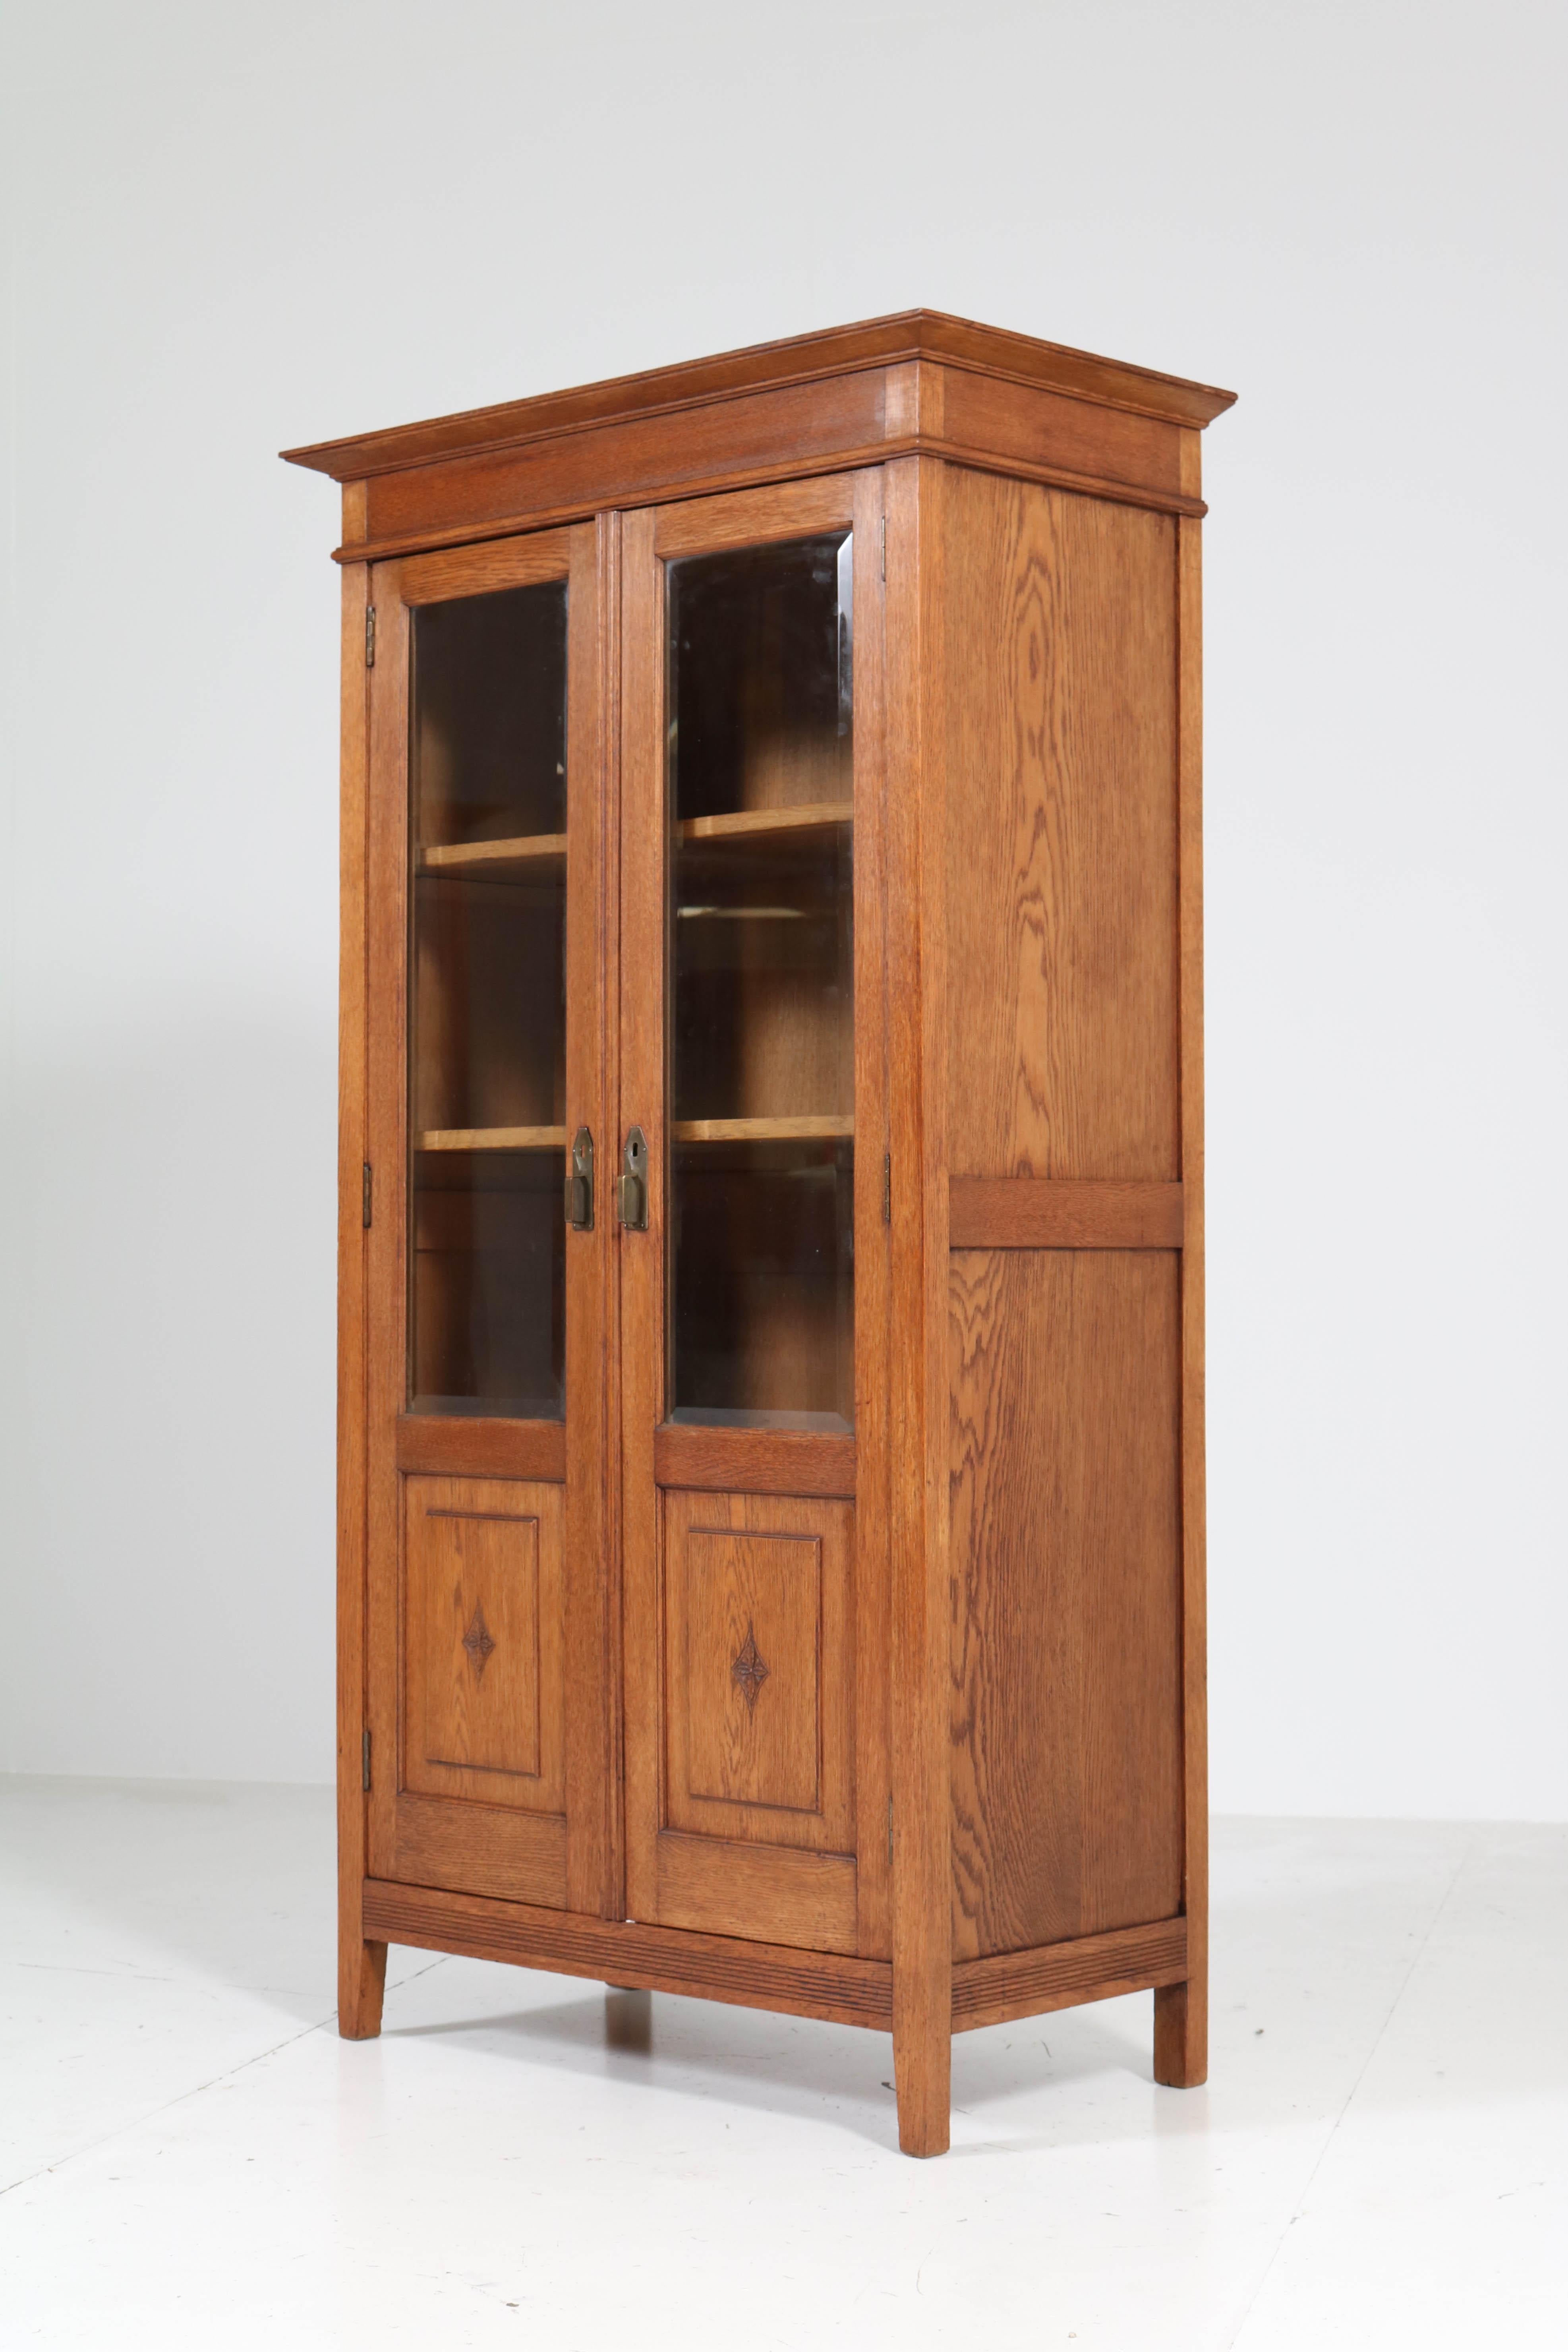 Early 20th Century Oak Art Nouveau Arts & Crafts Bookcase with Beveled Glass, 1900s